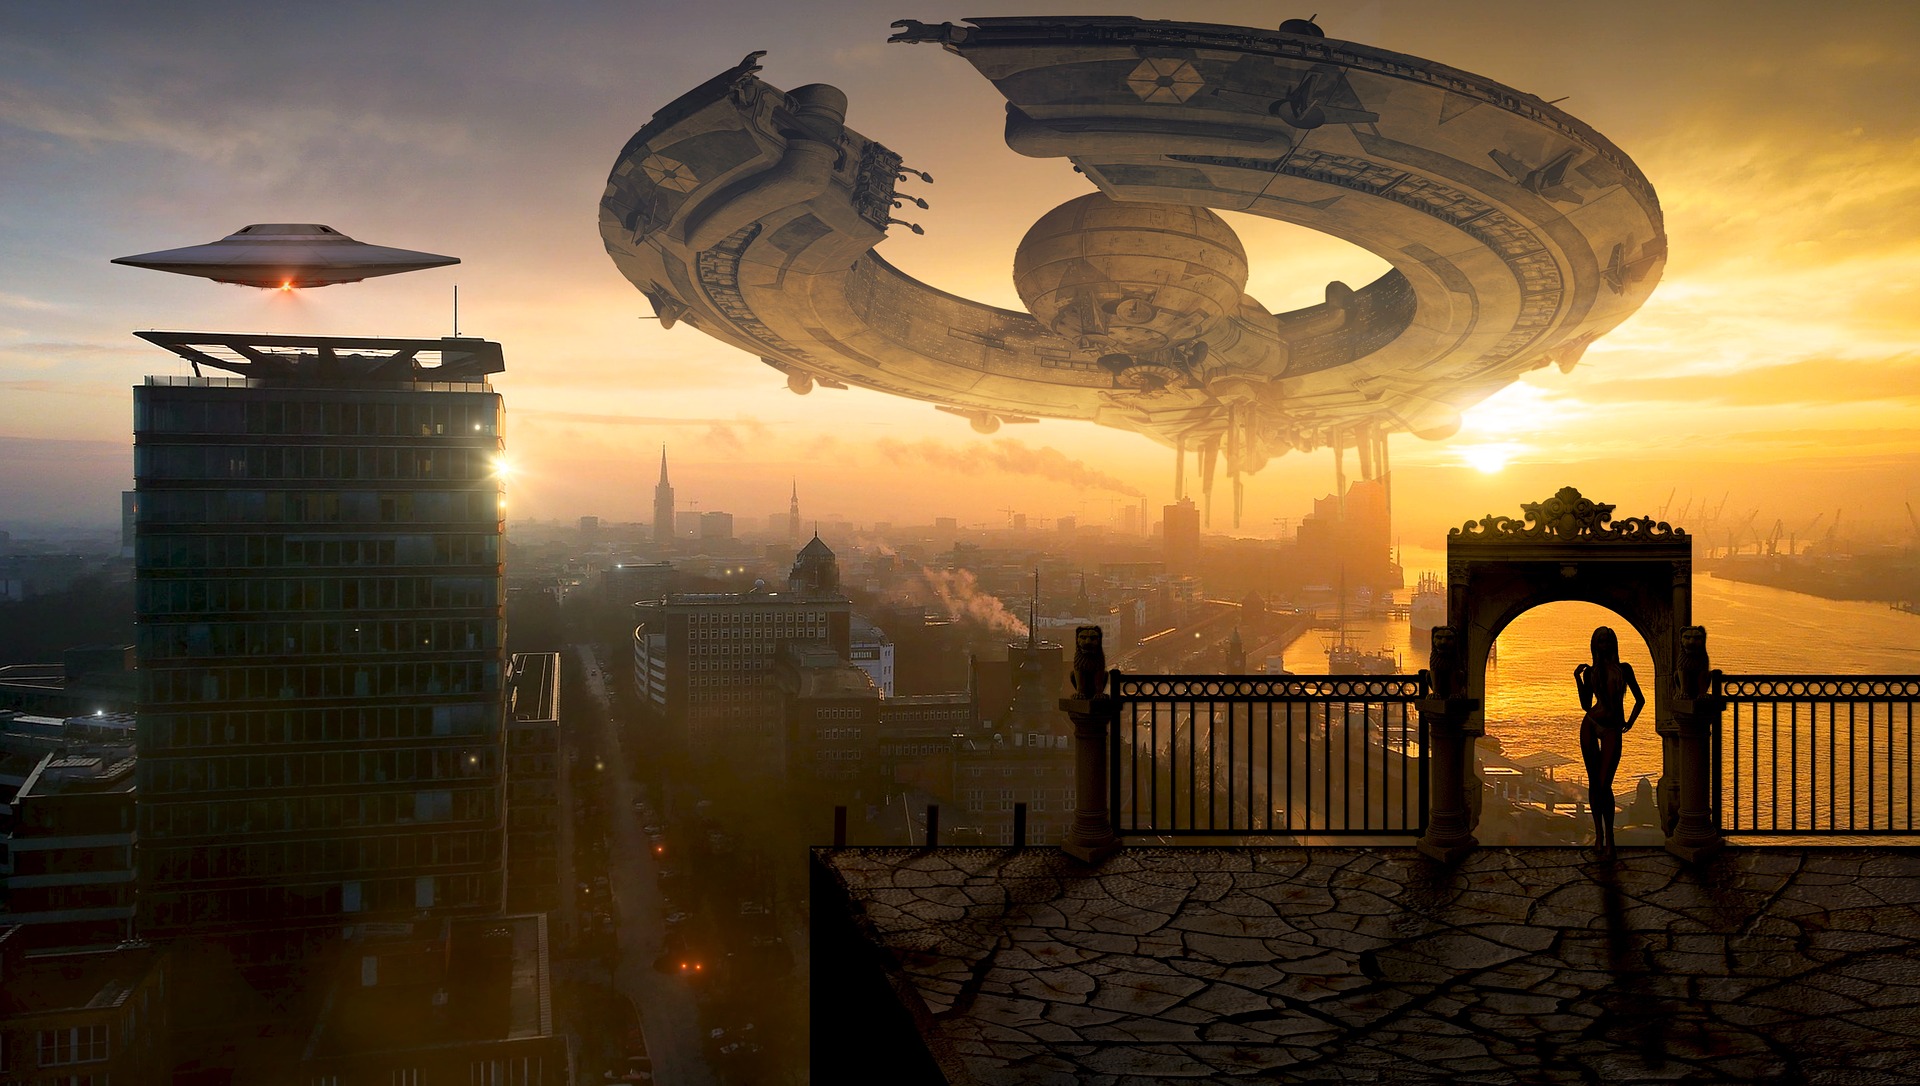 Space ship in the sky over an alien city